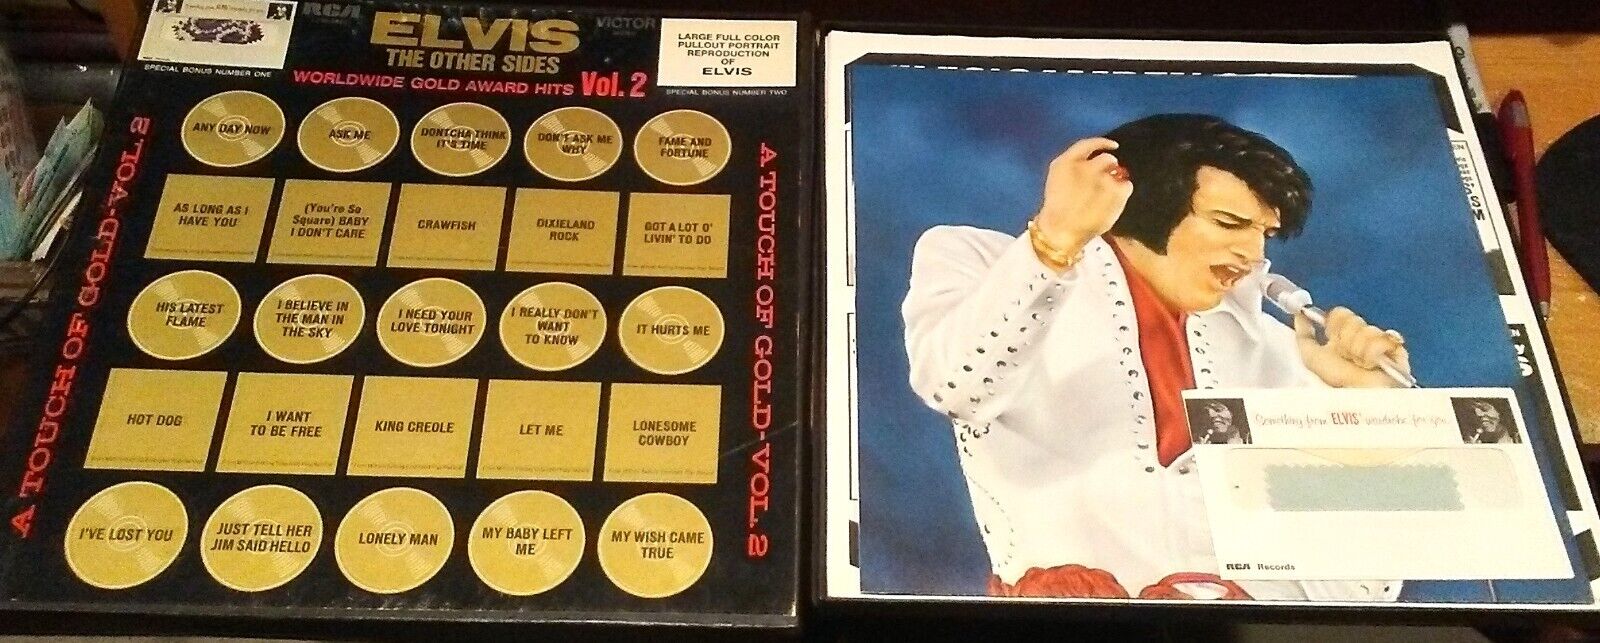 ELVIS PRESLEY LP  THE OTHER SIDES VOL.2   4 RECORDS W/ POSTER & BONUS FABRIC